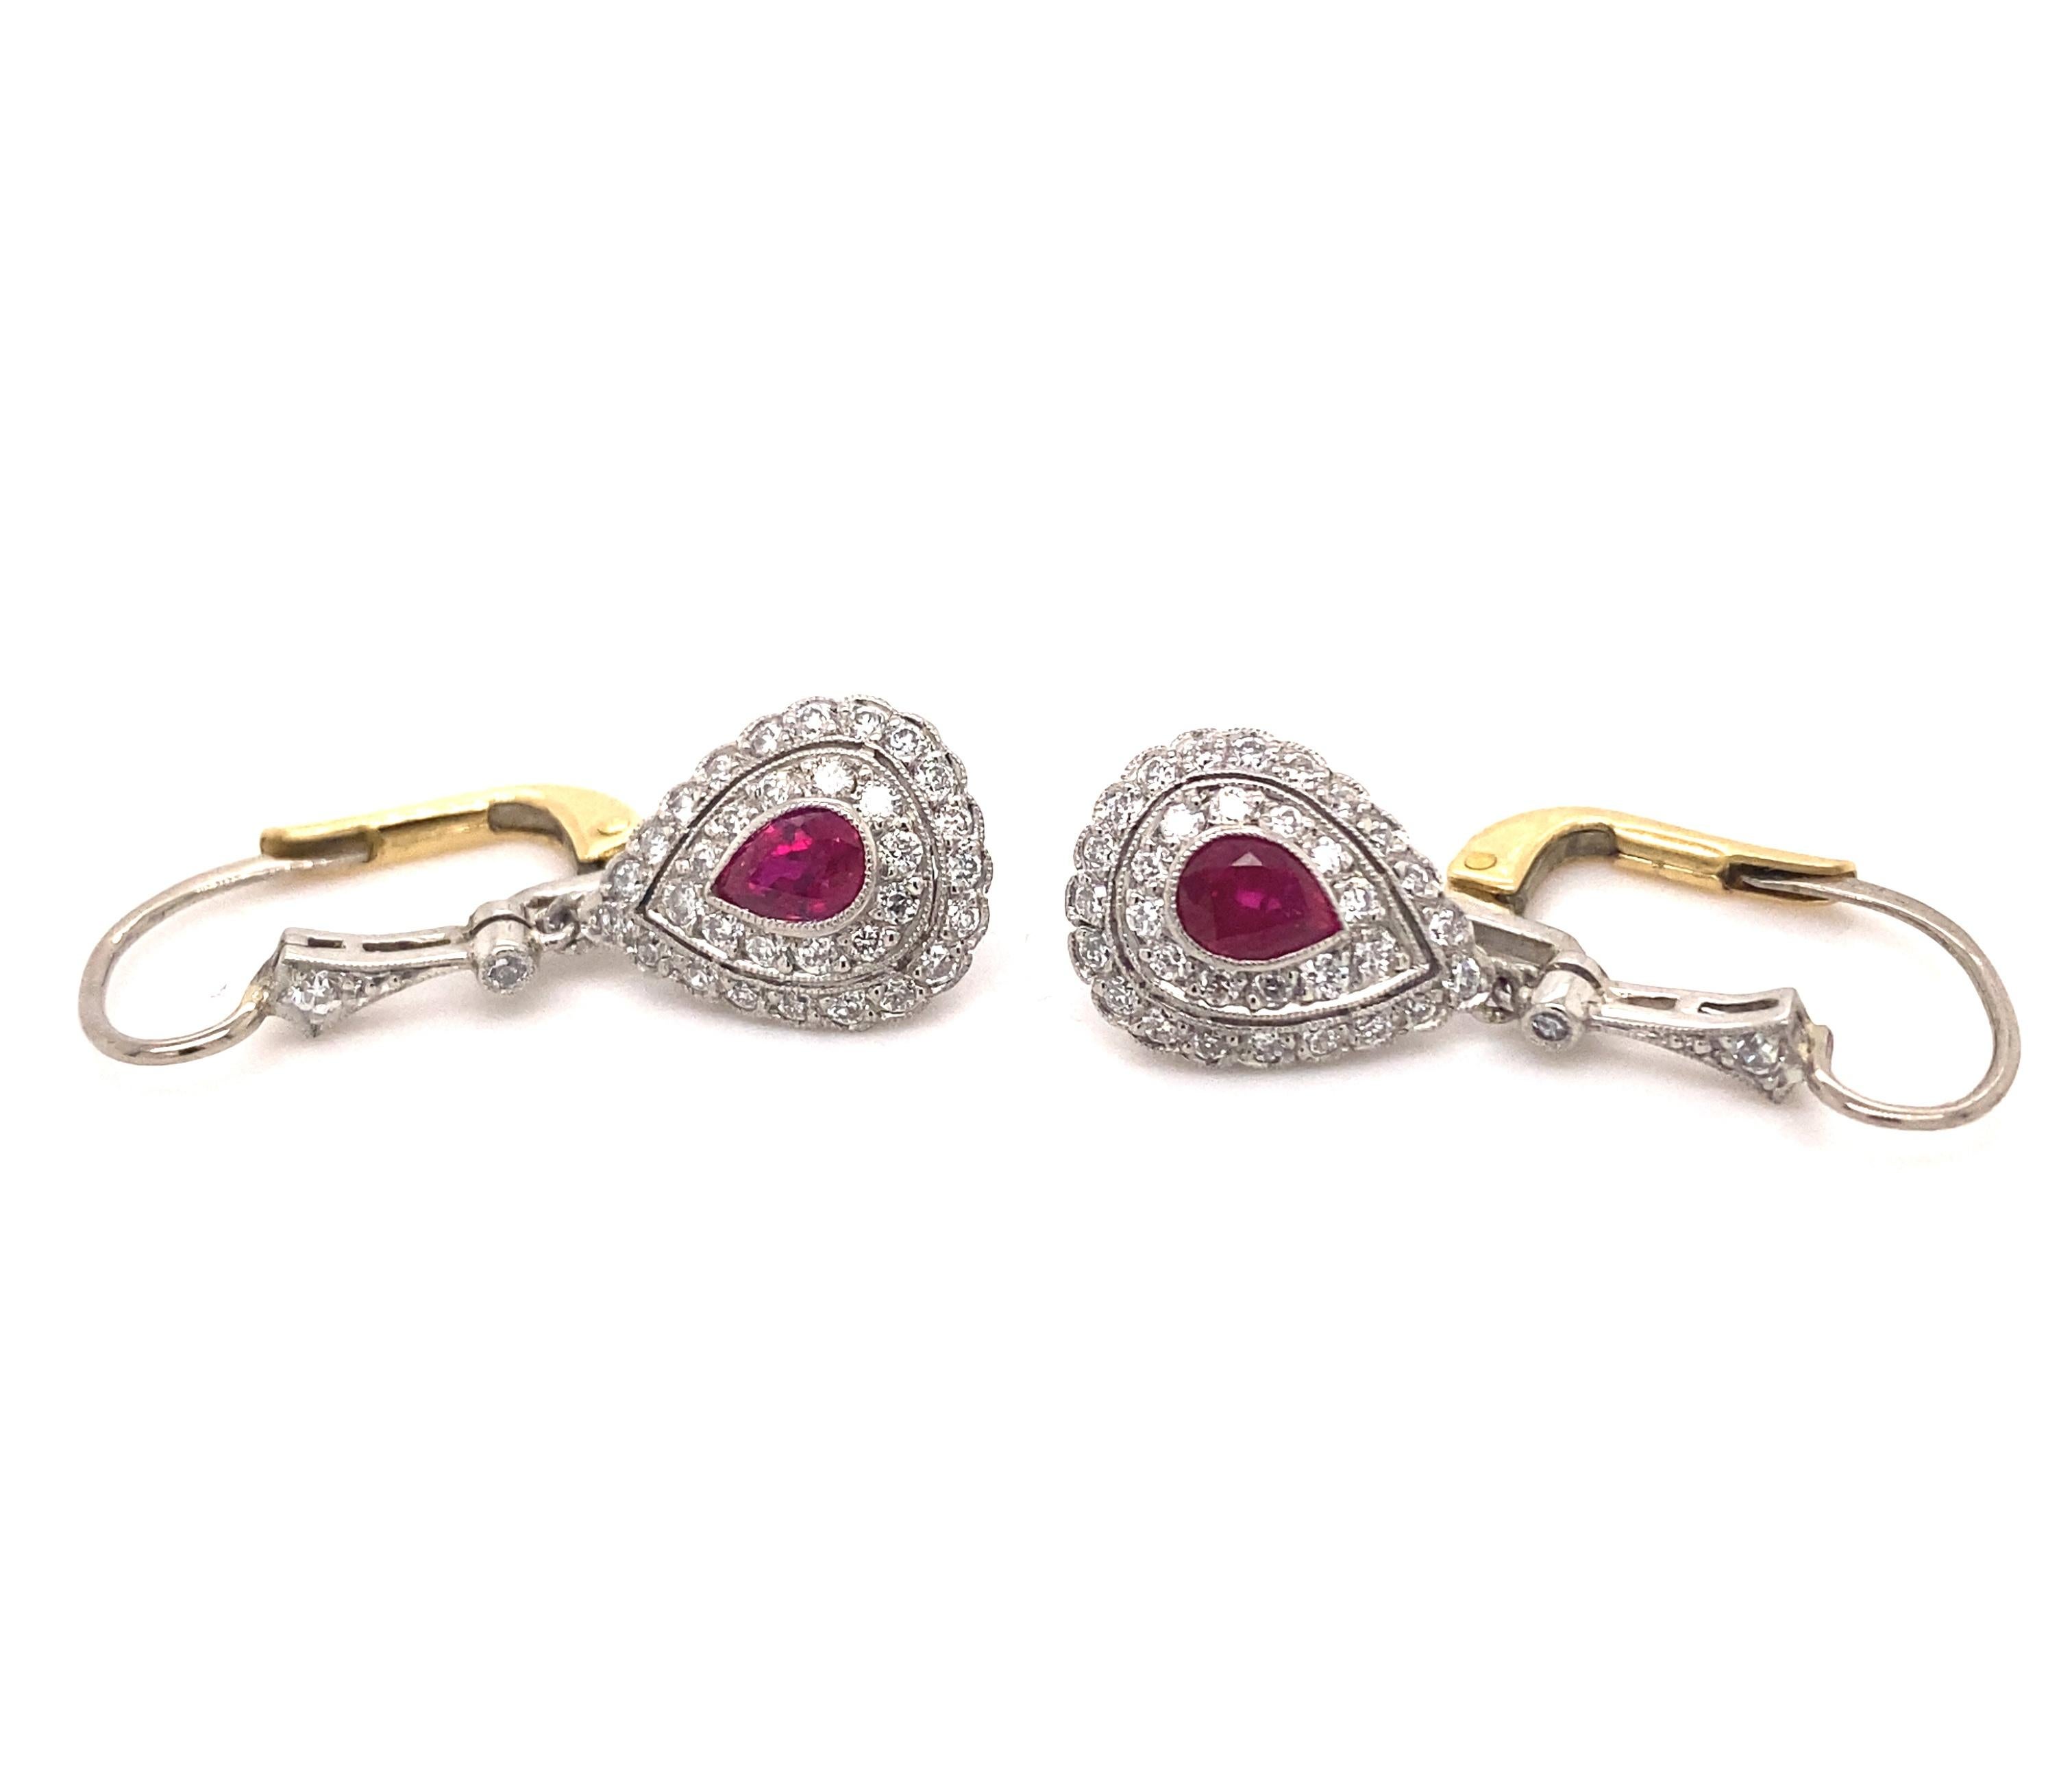 This is a beautiful pair of vintage art deco dangle earrings with rubies and diamonds set in platinum with 18k gold backs. The pear shaped rubies have amazing deep red color with good clarity estimated carat weight .90 carats. The 64 white diamonds